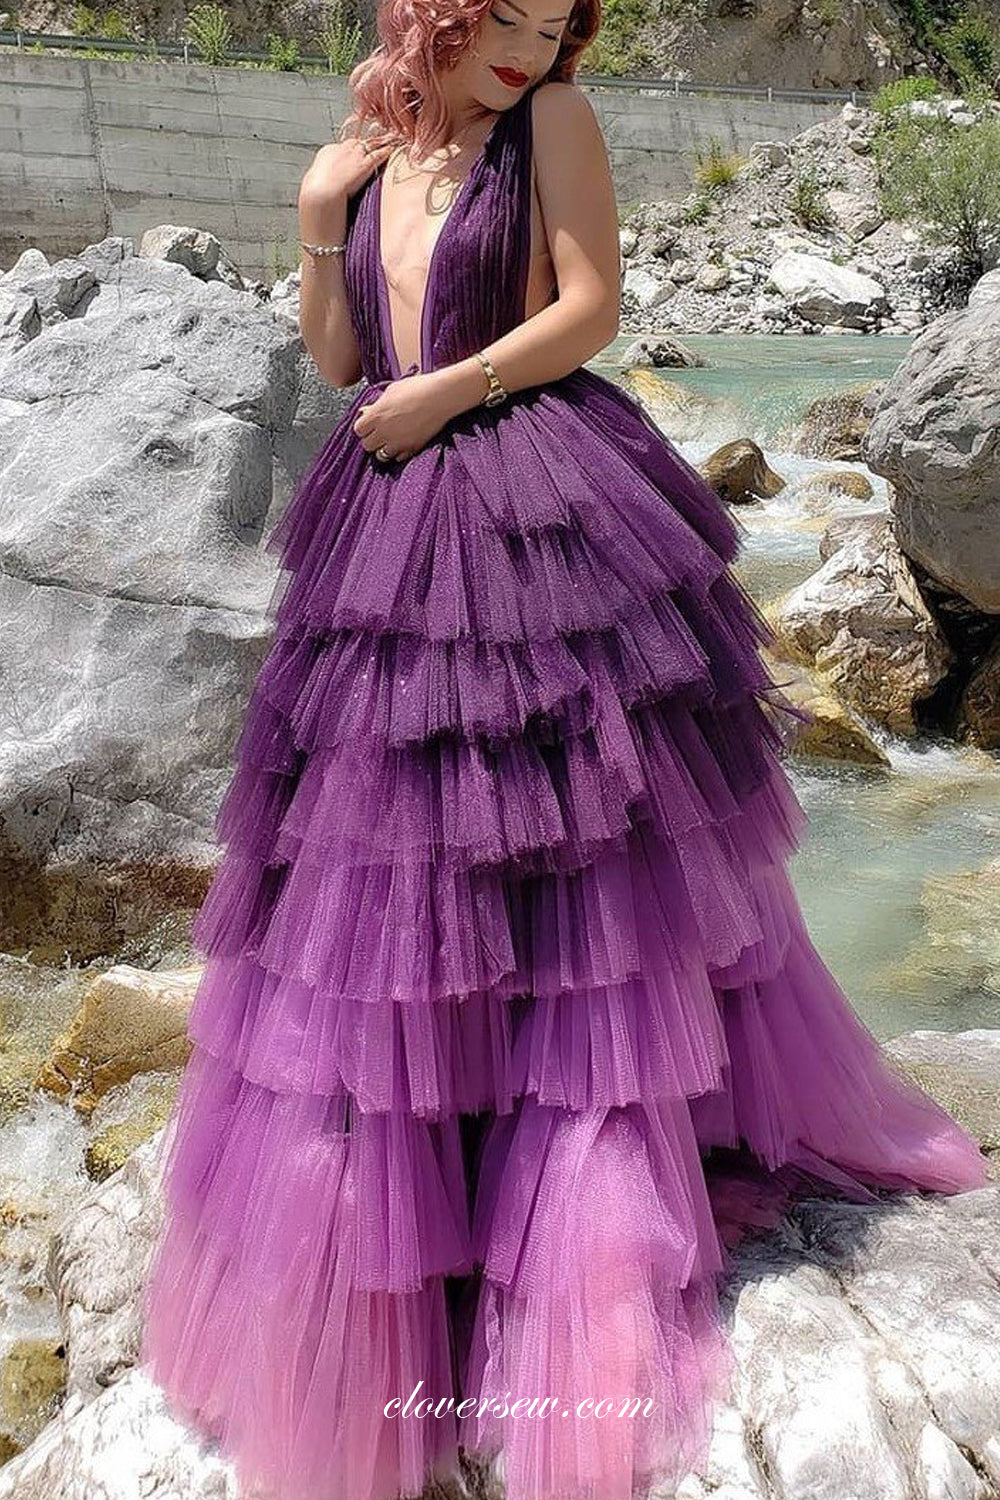 Purple Tulle Tiered A-line Deep V-neck Backless Prom Dresses, CP0747